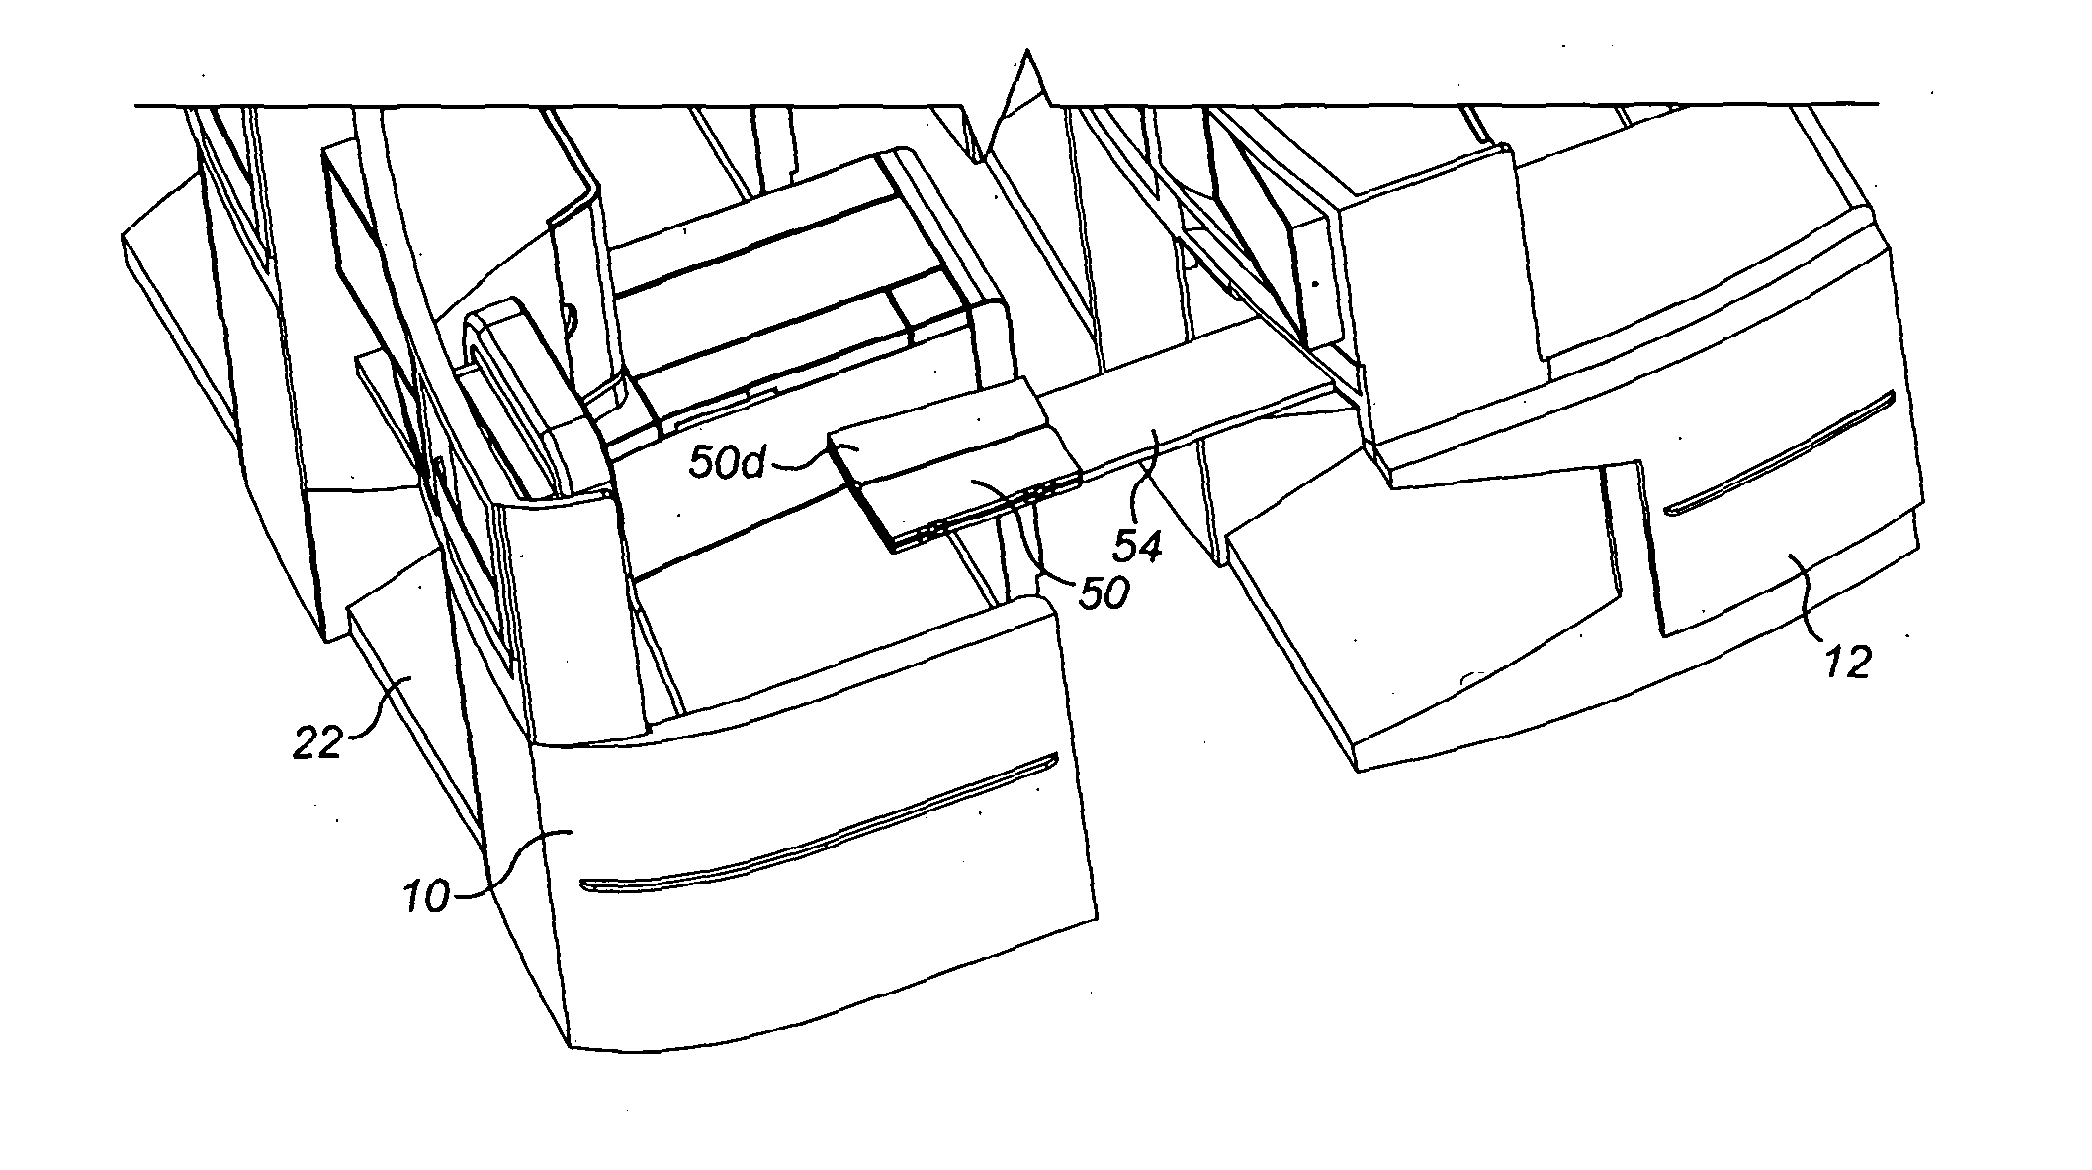 Aircraft seat arrangement including table